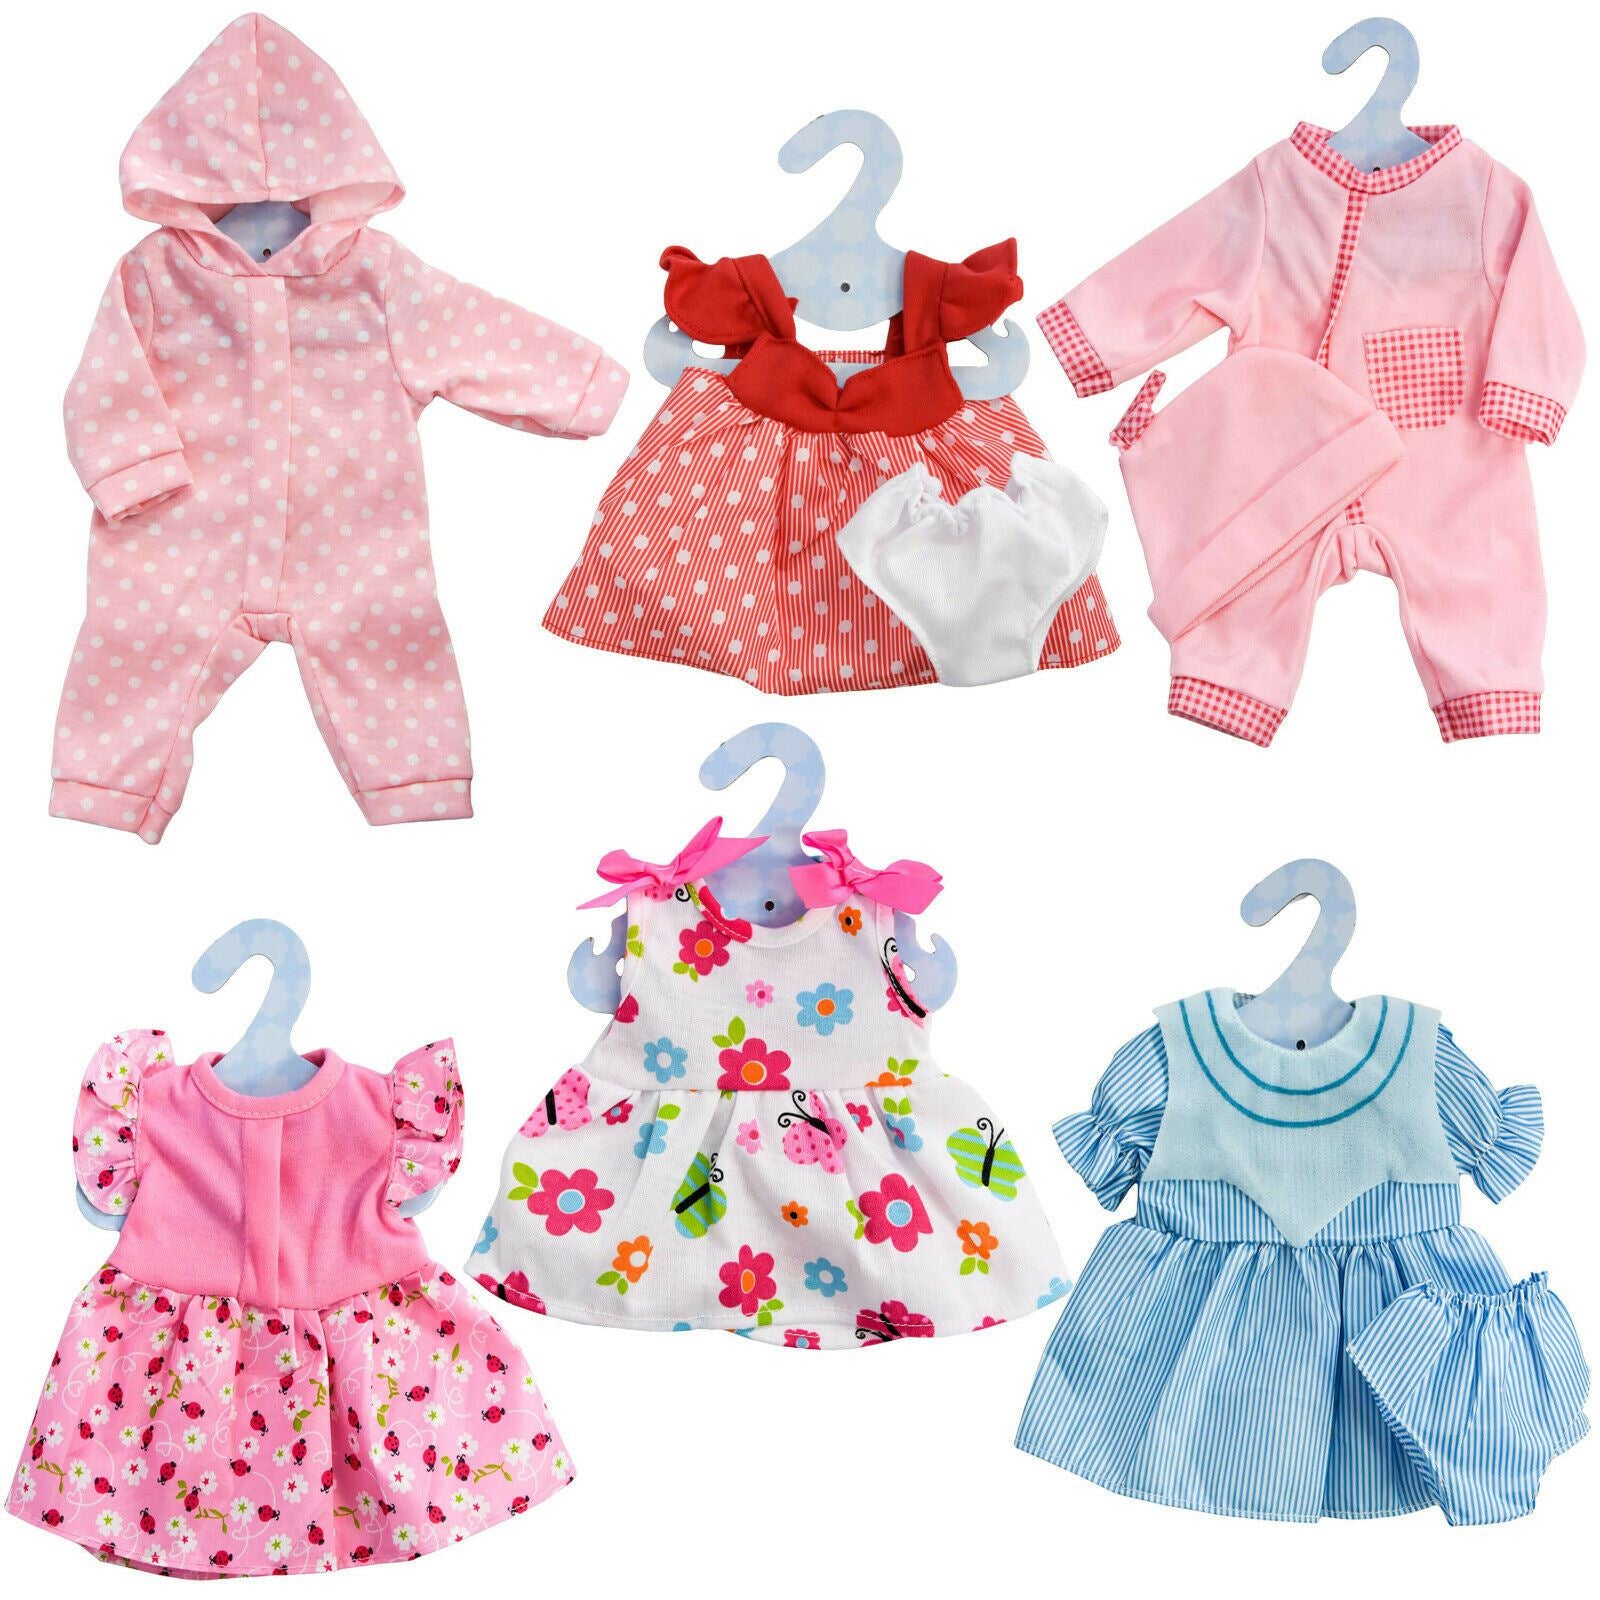 Baby Doll Clothes Set of 6 for Dolls 12-16" by BiBi Doll - The Magic Toy Shop